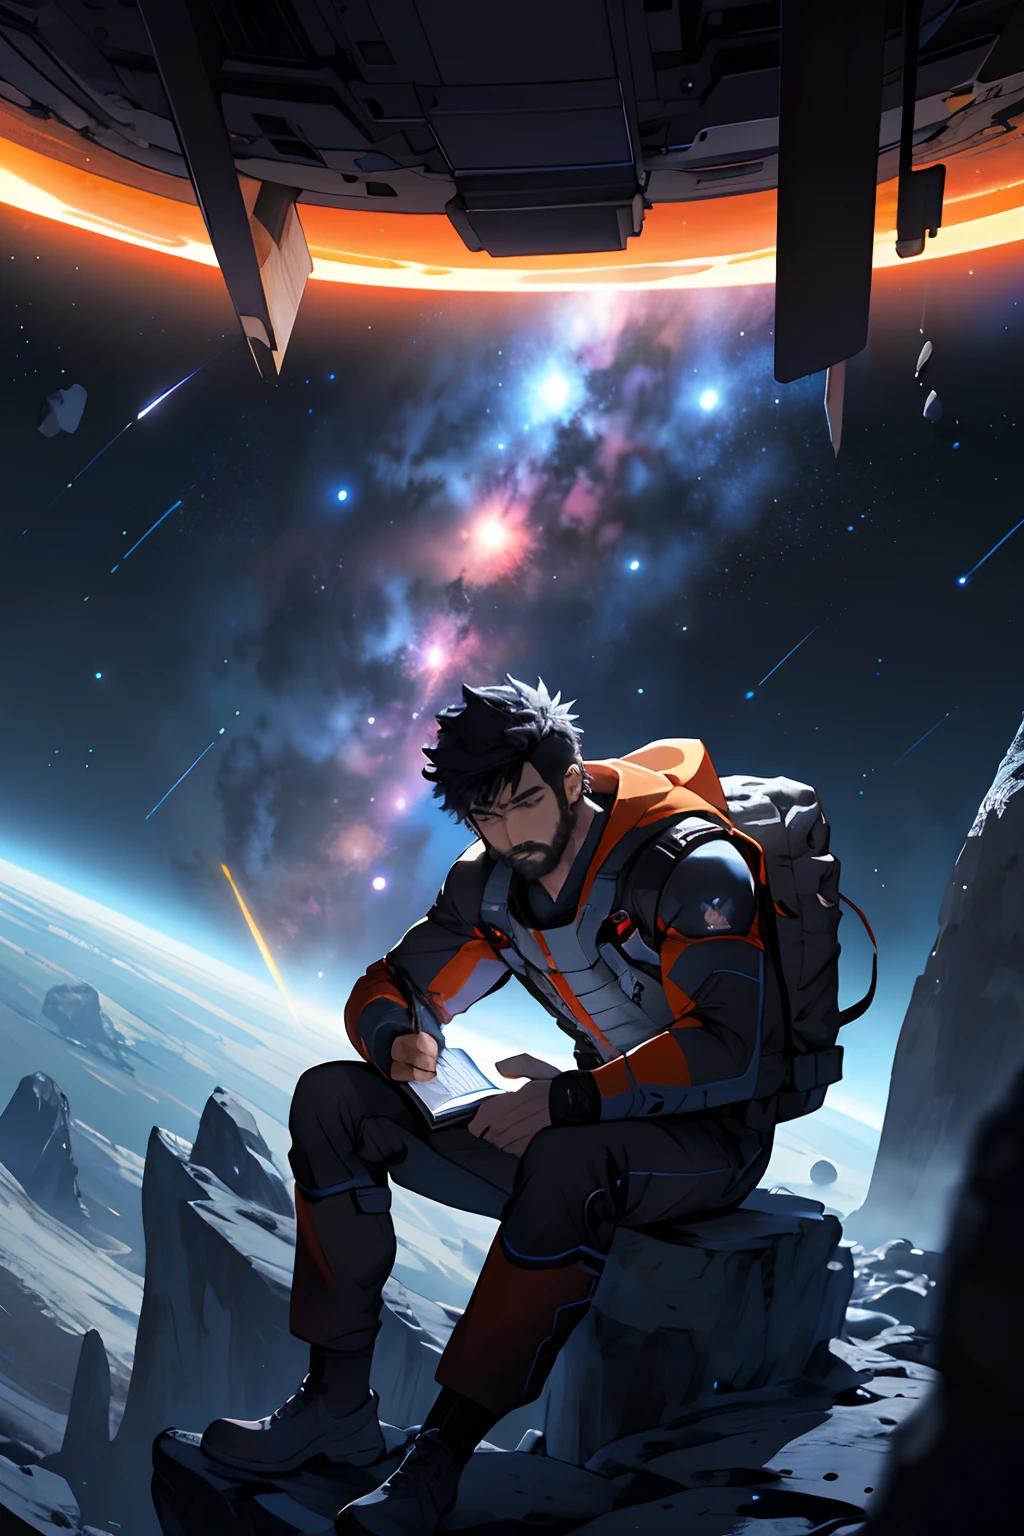 Draw a young programmer, sitting on a research platform floating in the middle of an asteroid belt. He is studying with a notebook, surrounded by several asteroids glowing with fiery auras. Dramatic lighting from distant stars and planets illuminates the scene, casting deep shadows on the suit. The young man looks confident and determined, looking at the vast and mysterious universe with wonder and respect,facial hair, cowboy shot,